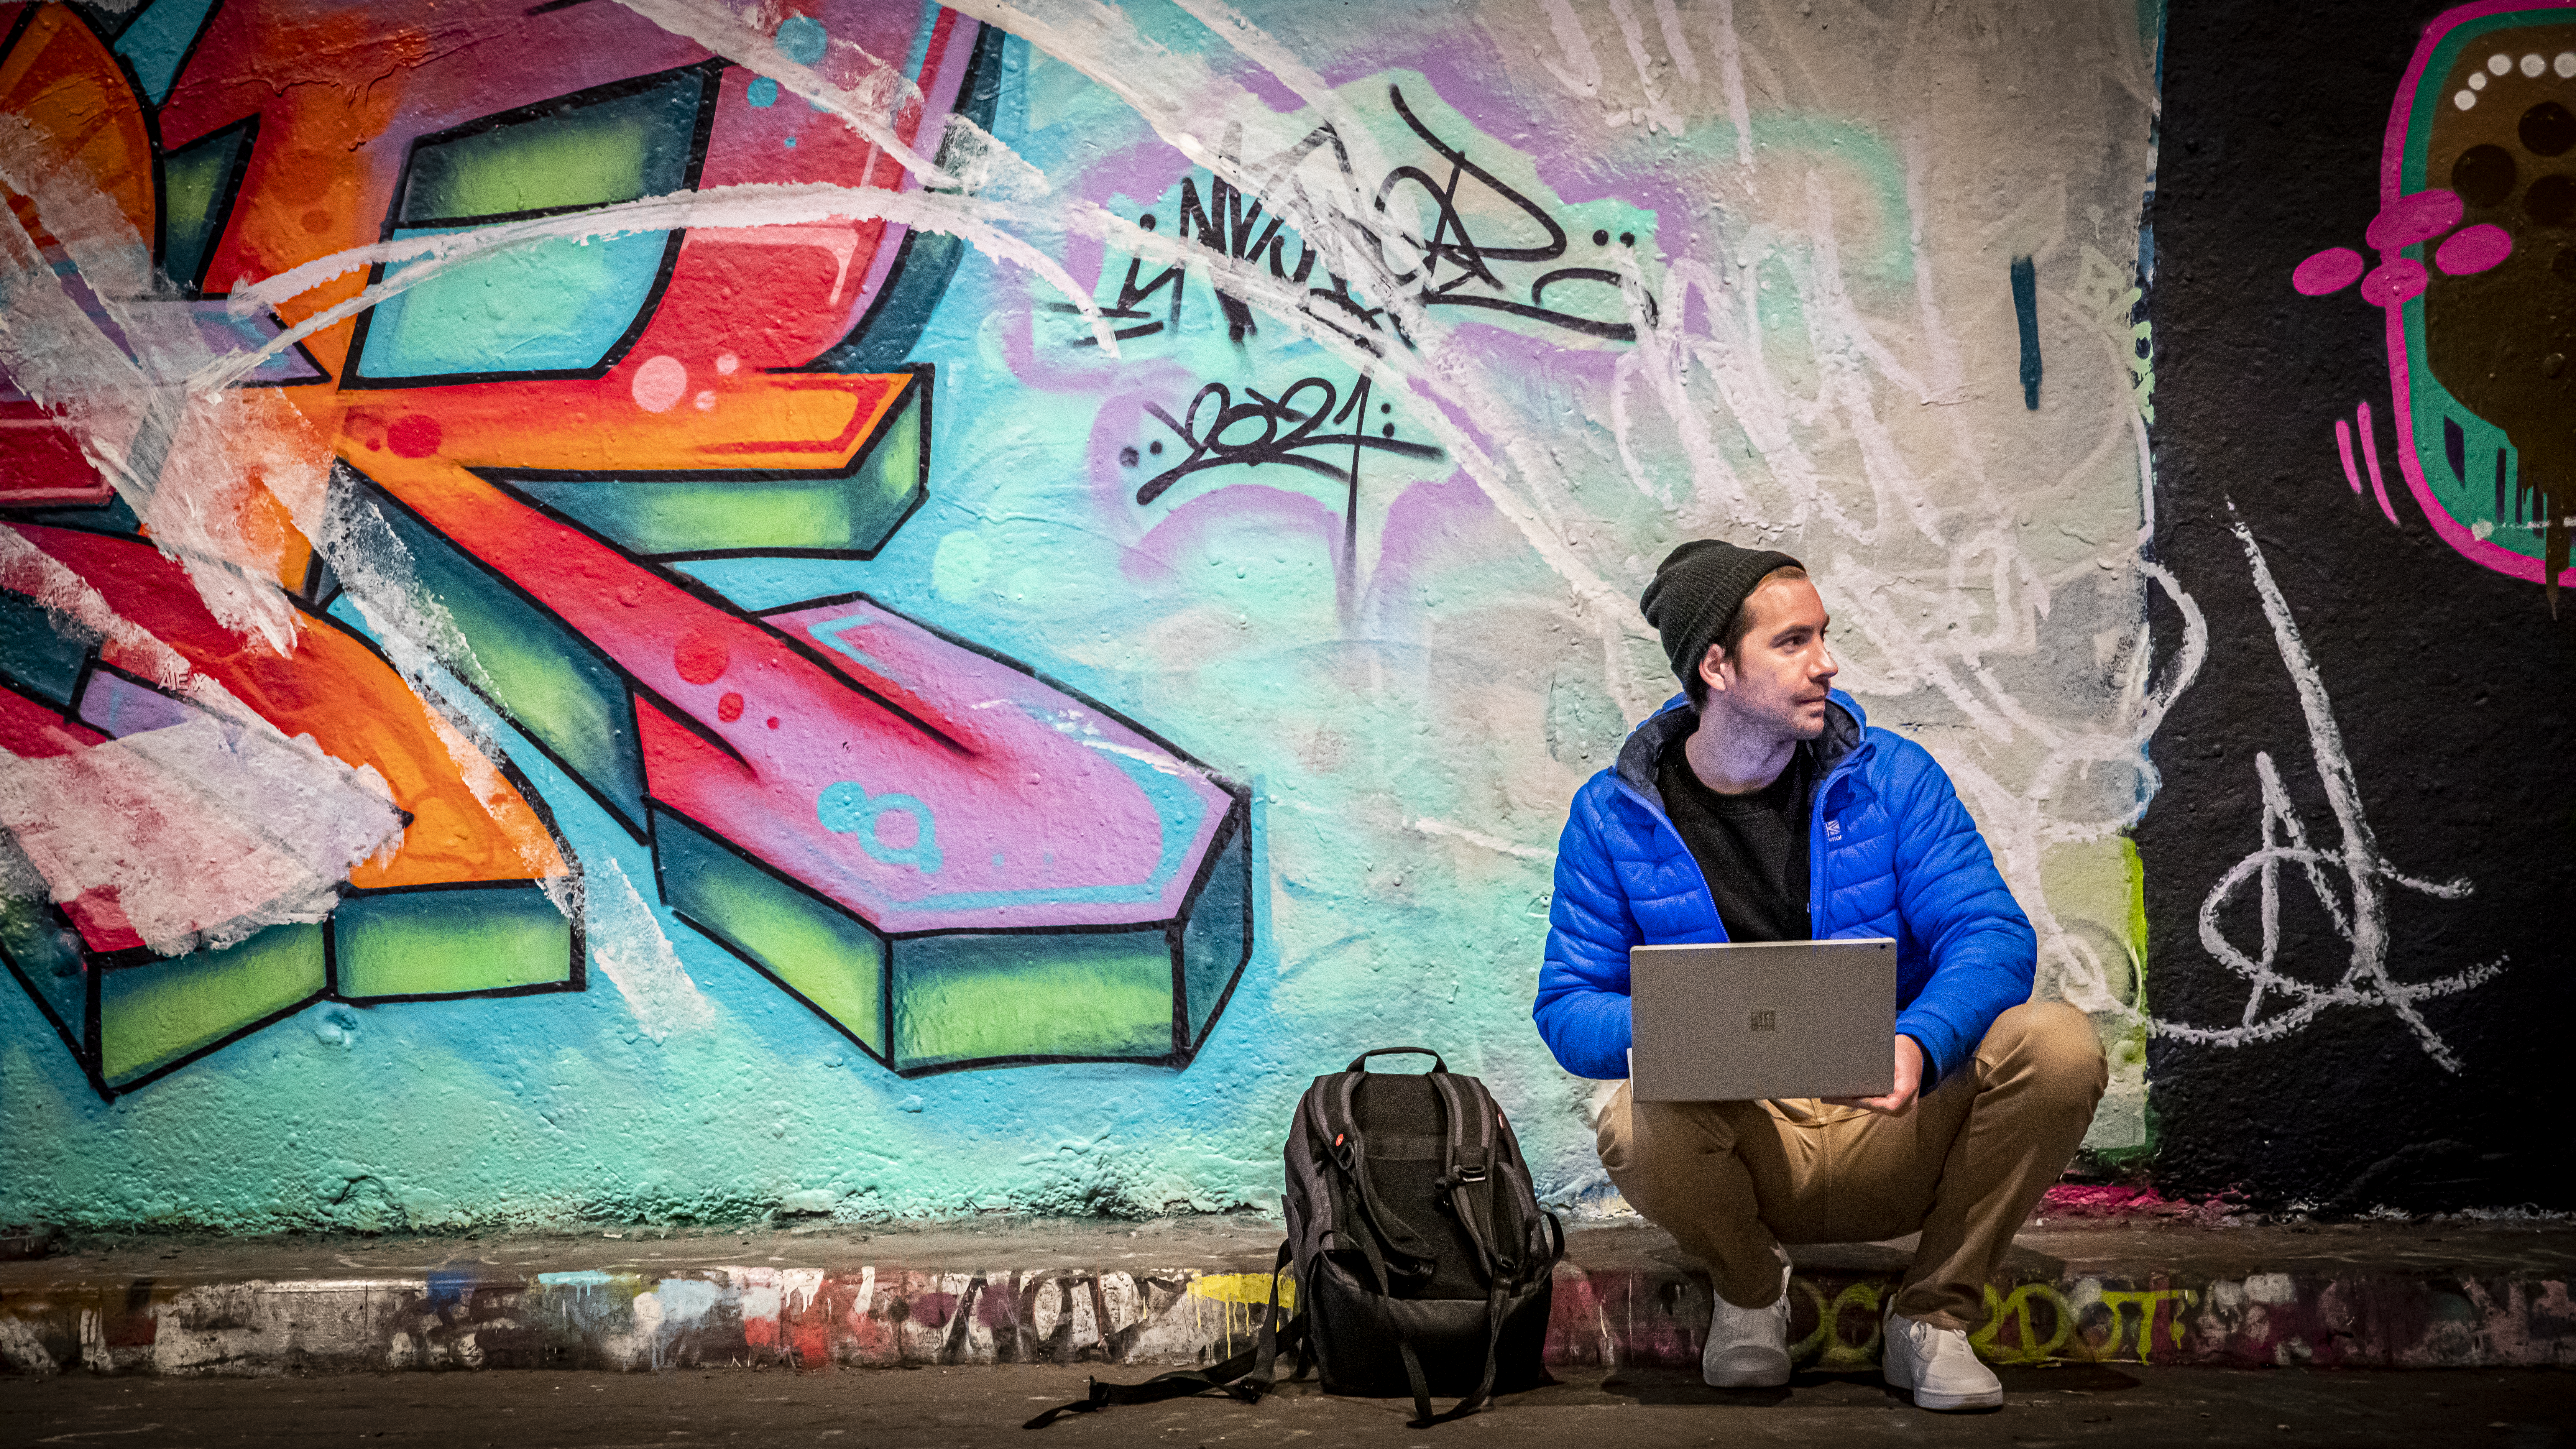 Artist Paperboyo sits on a London street and uses a Surface device